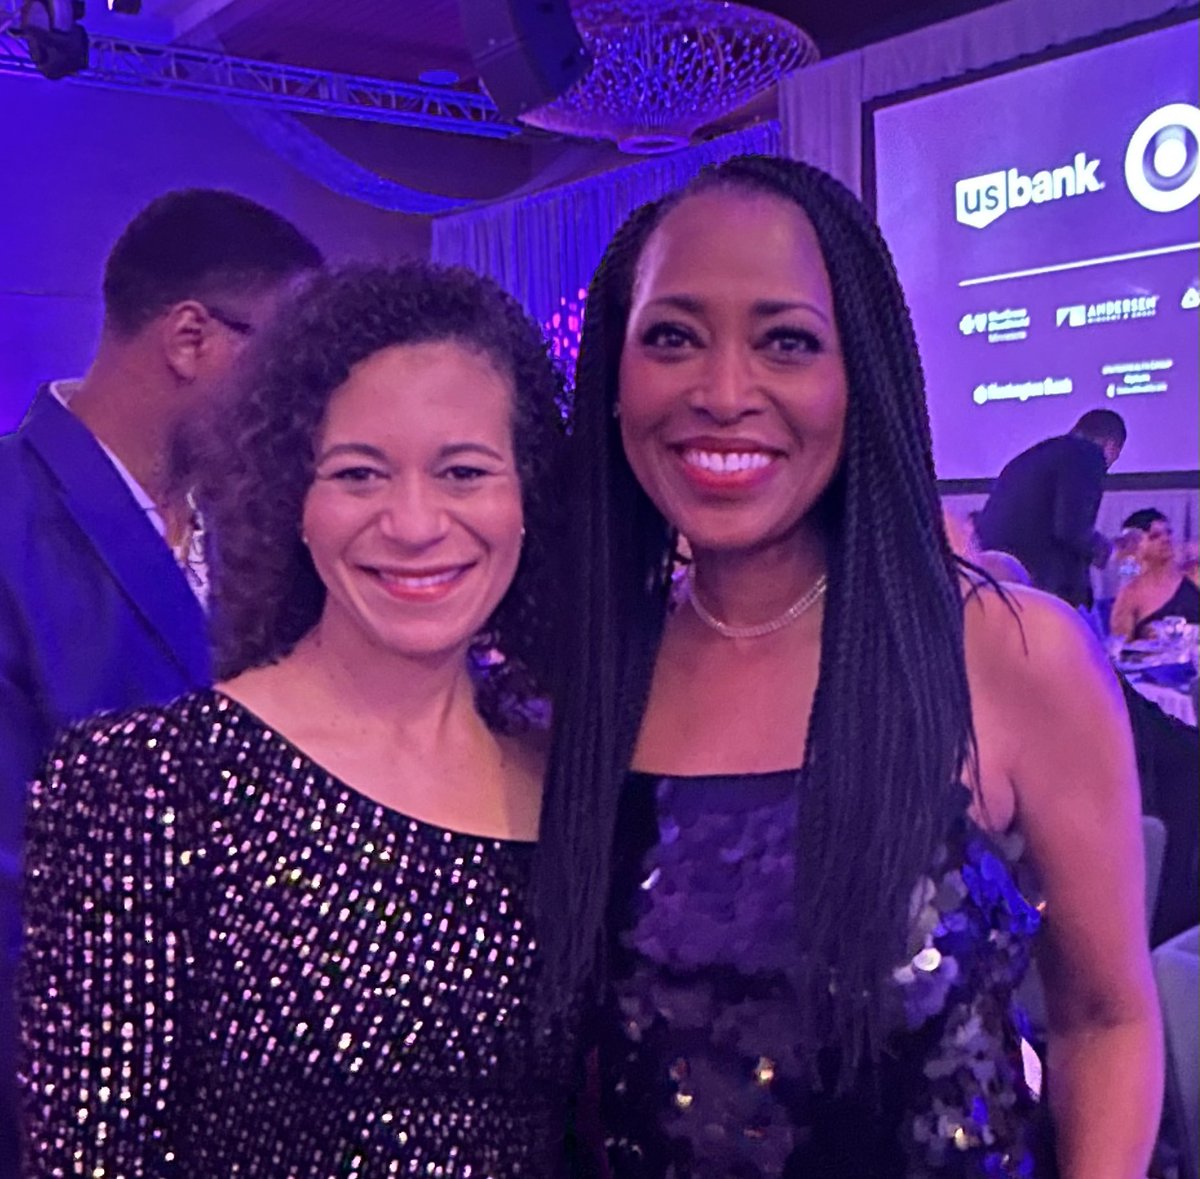 Congrats to the brilliant Laysha Ward! Laysha received inaugural Celebrating The Sistas @celebratingthesistas *ICON AWARD*. What makes @LayshaWard so legendary & magnetic is her ability to inspire, comfort & motivate. Thank you for the invite to witness you receiving this honor!